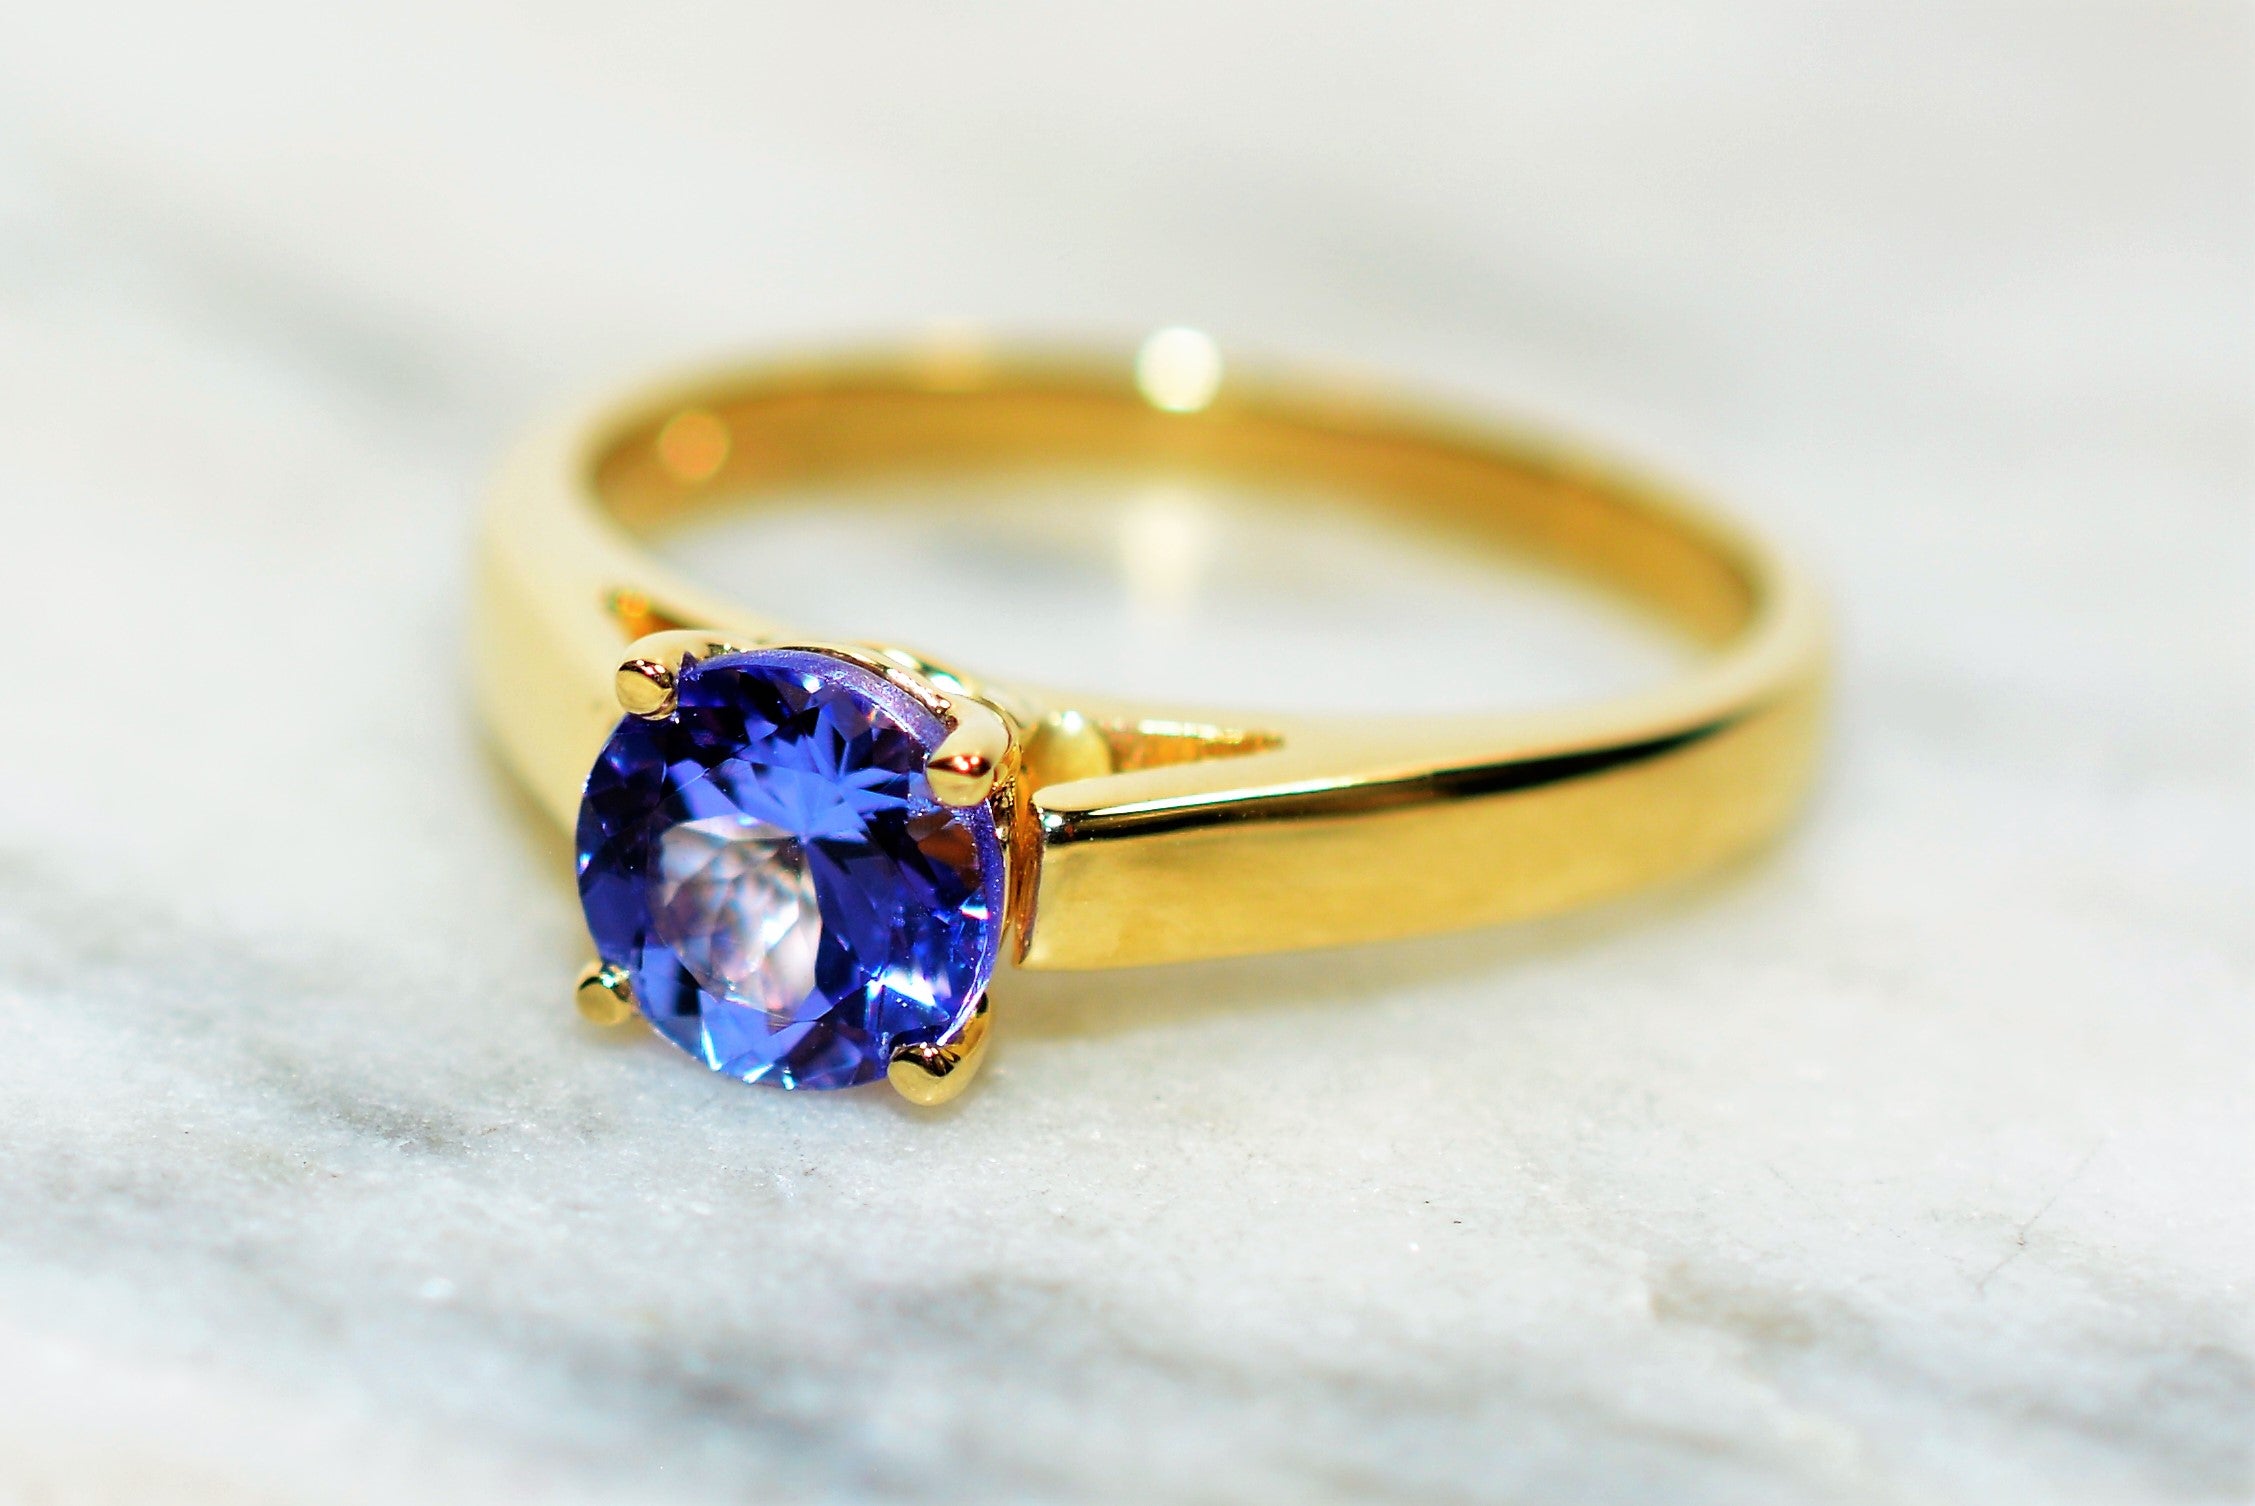 Natural Tanzanite Ring 14K Solid Gold 1.16ct Solitaire Ring Gemstone Ring Engagement Ring Wedding Ring Bridal Jewelry December Birthstone